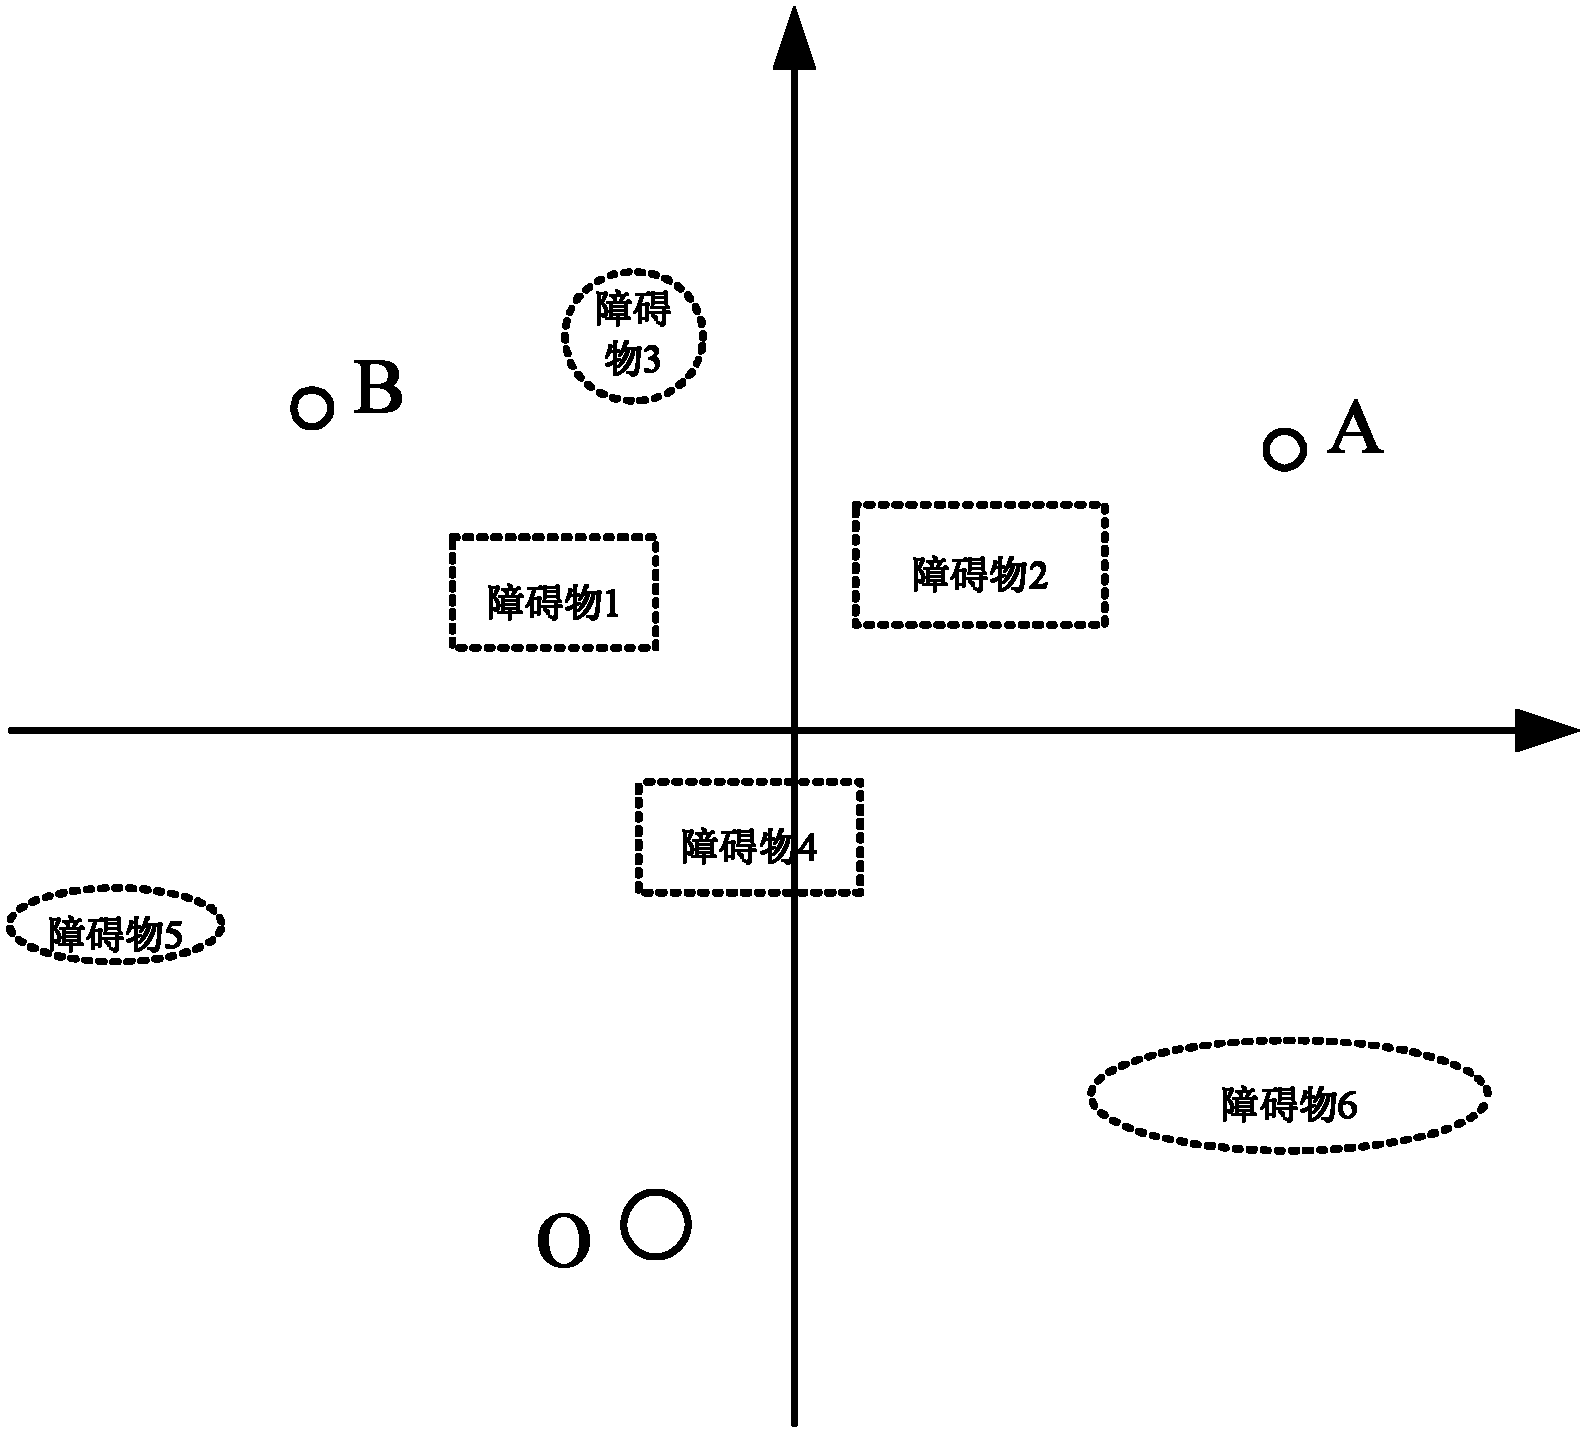 Method for planning path of lift object for crane